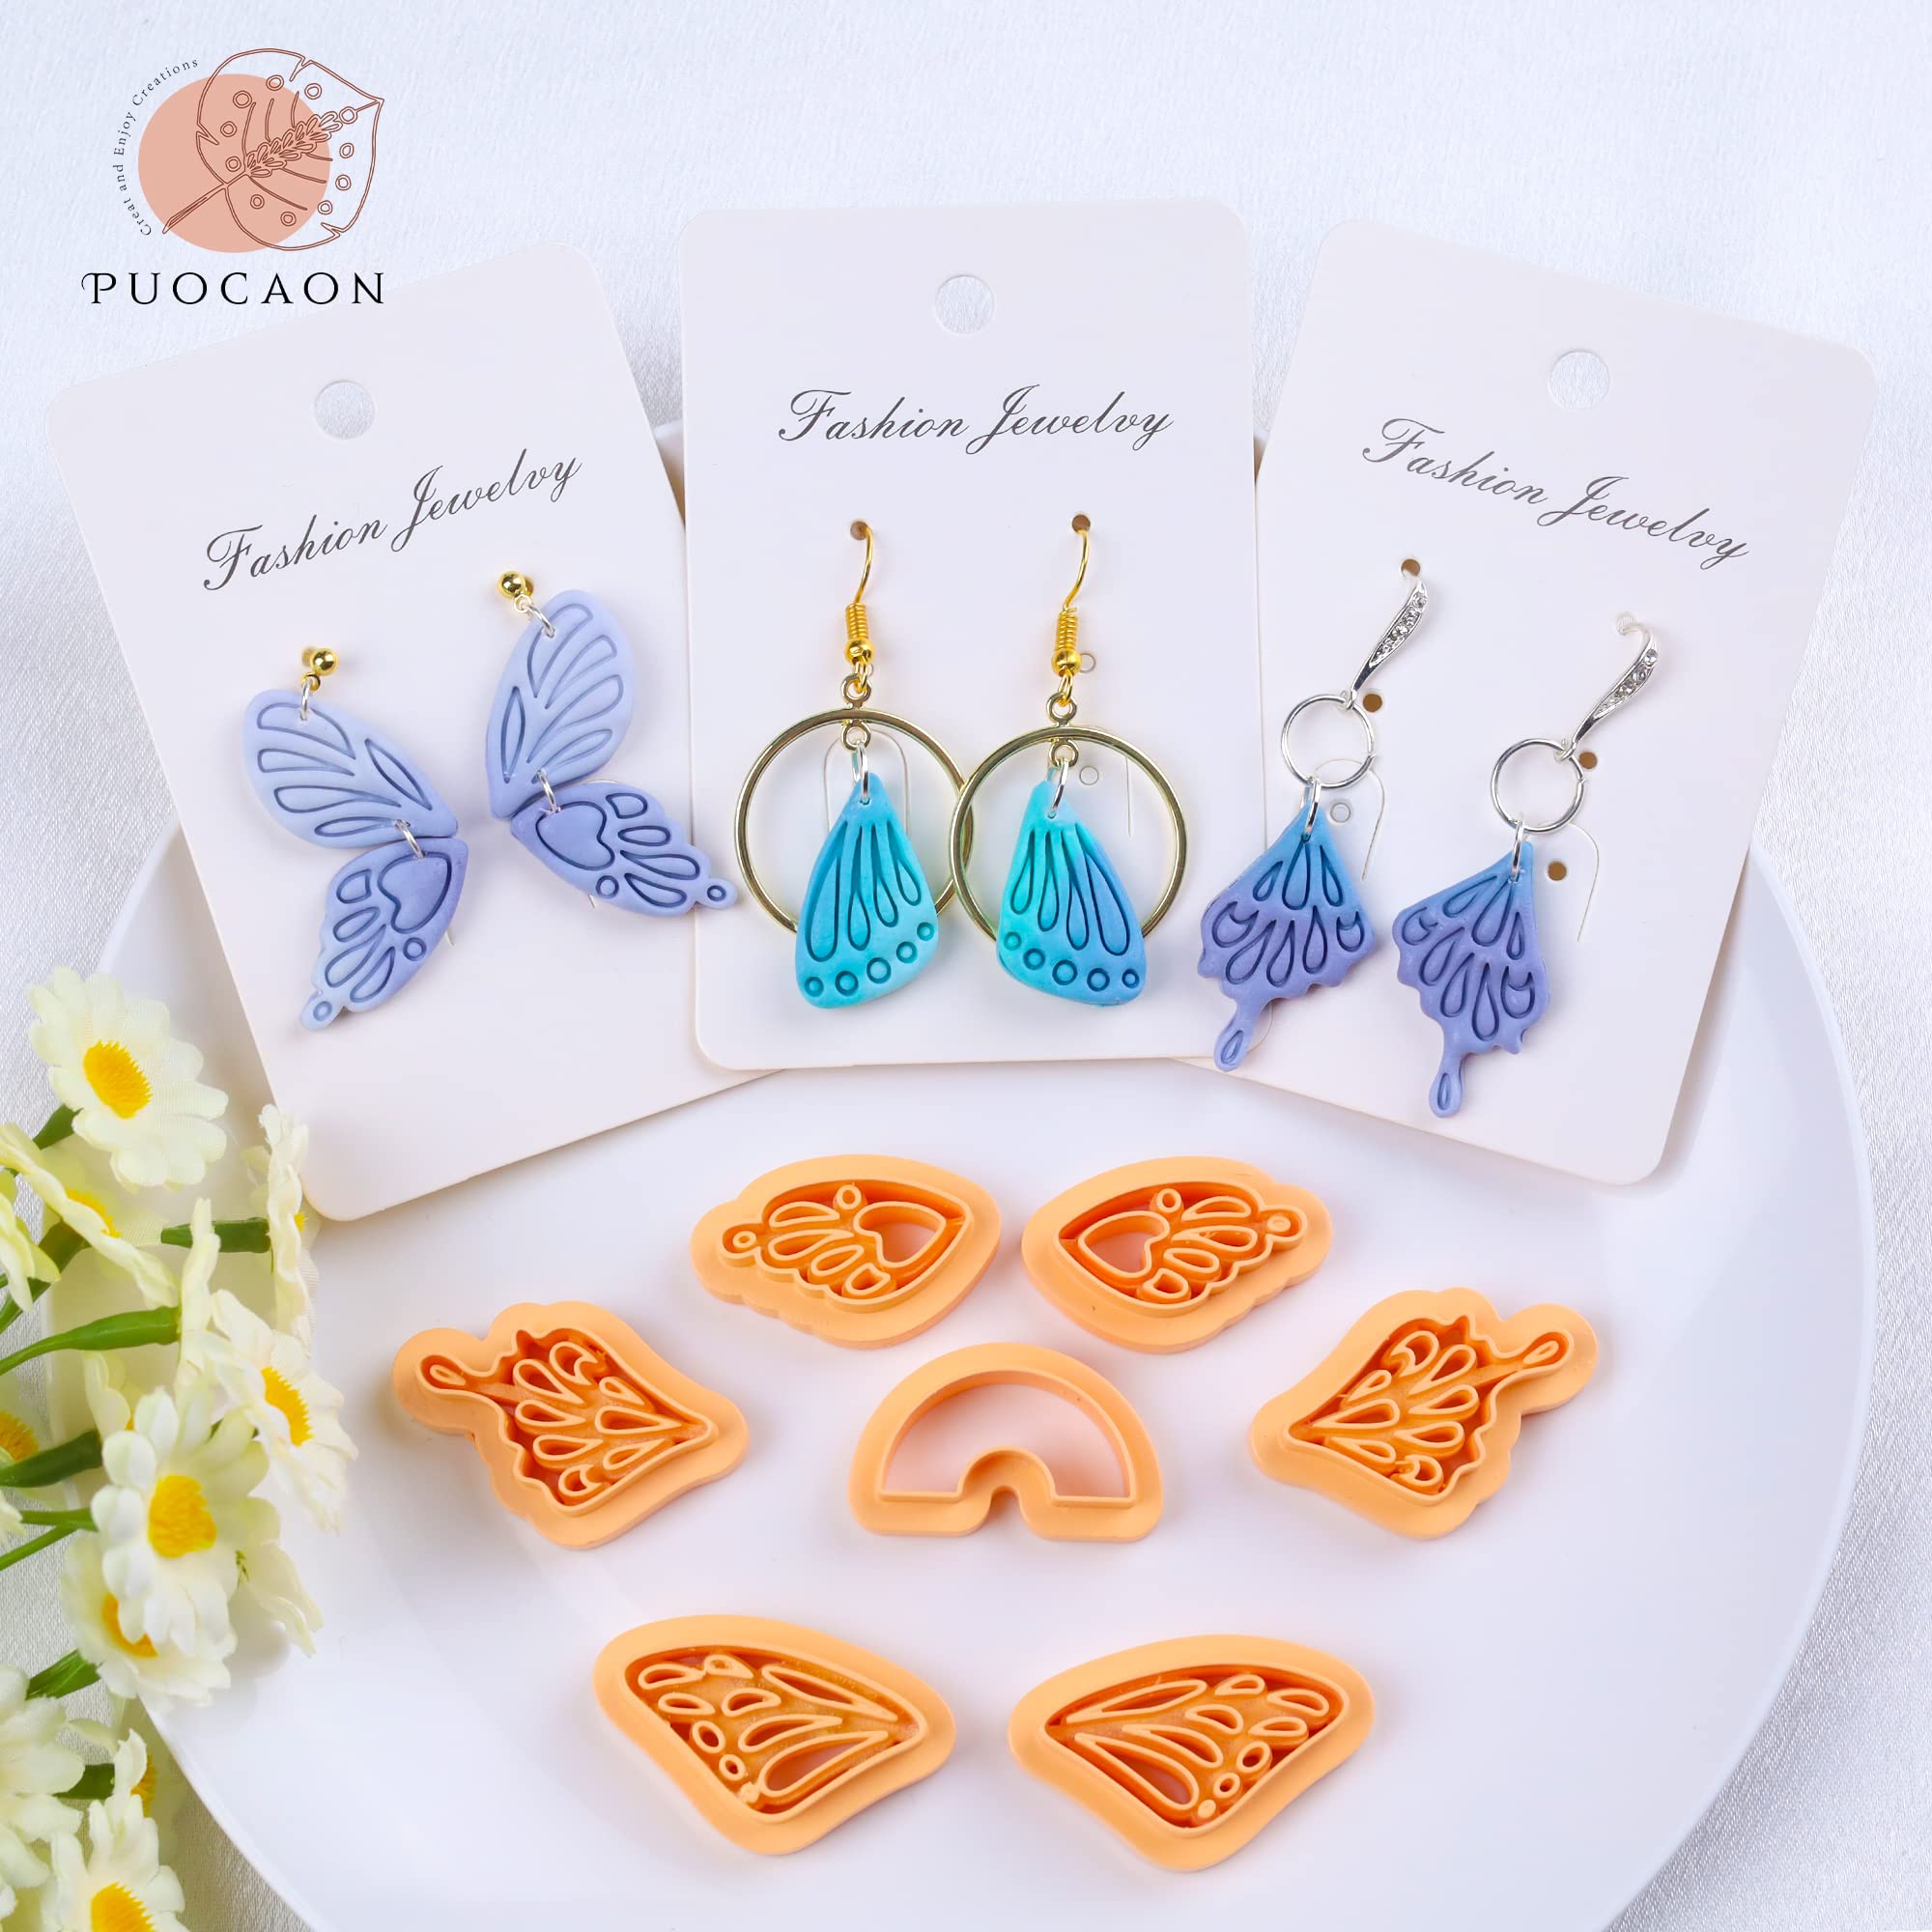 Clay Cutter Embossed Feather Fan Shape Polymer Clay Earring